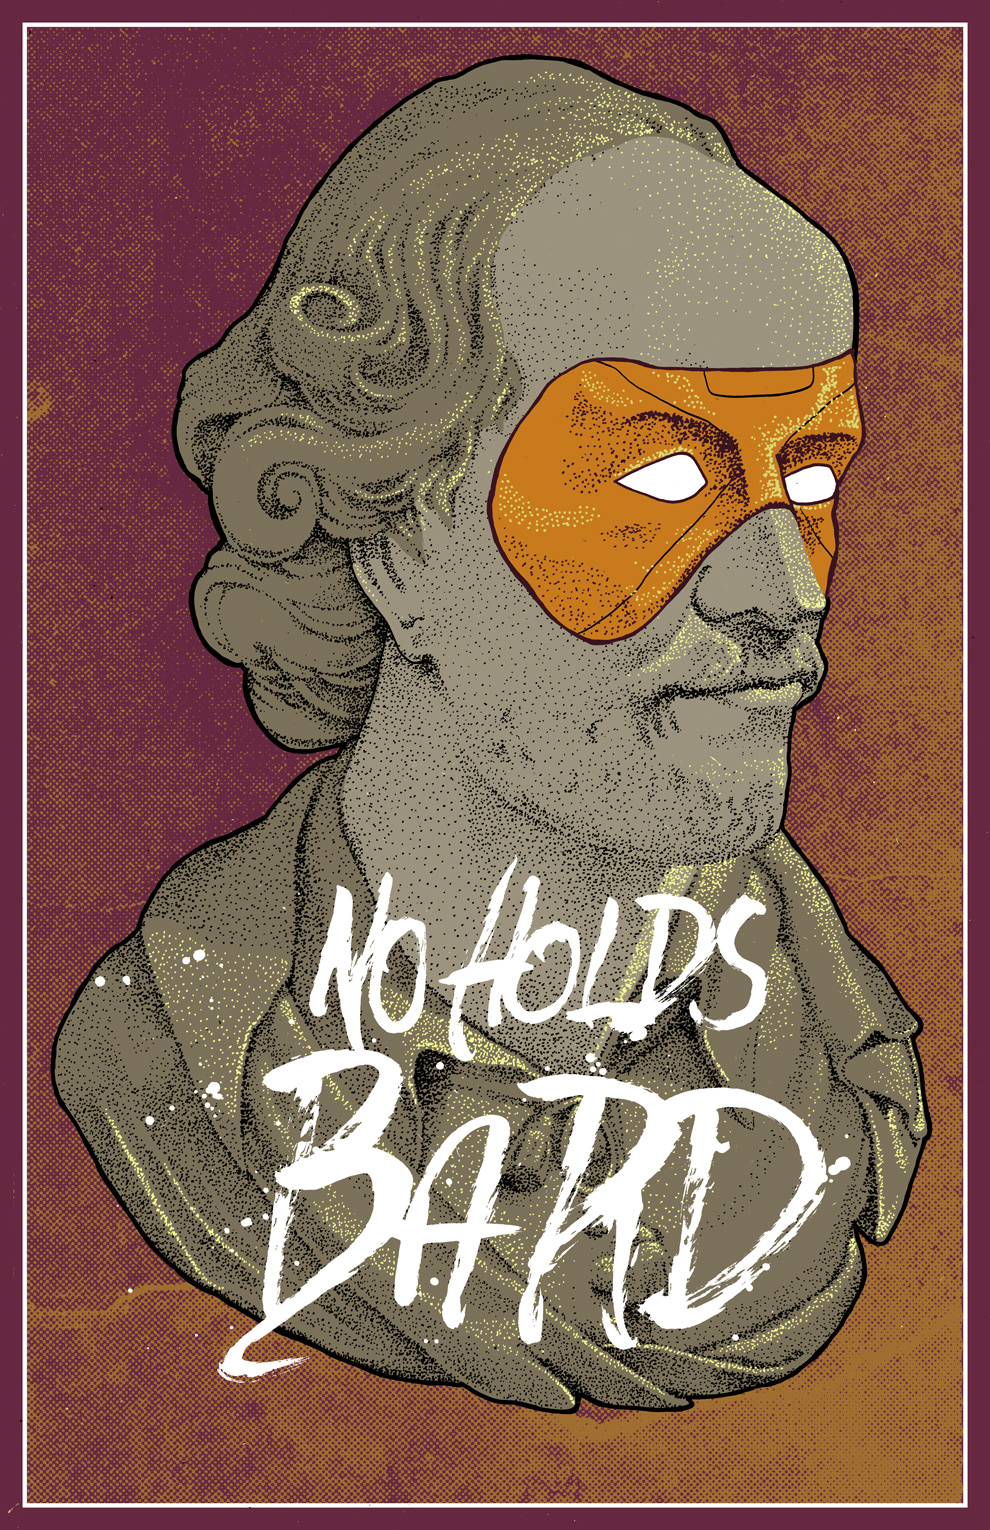 No Holds Bard Cover, an illustration by artist Dave Kloc of the bust of William Shakespeare wearing an orange superhero mask over a gold and maroon textured background.